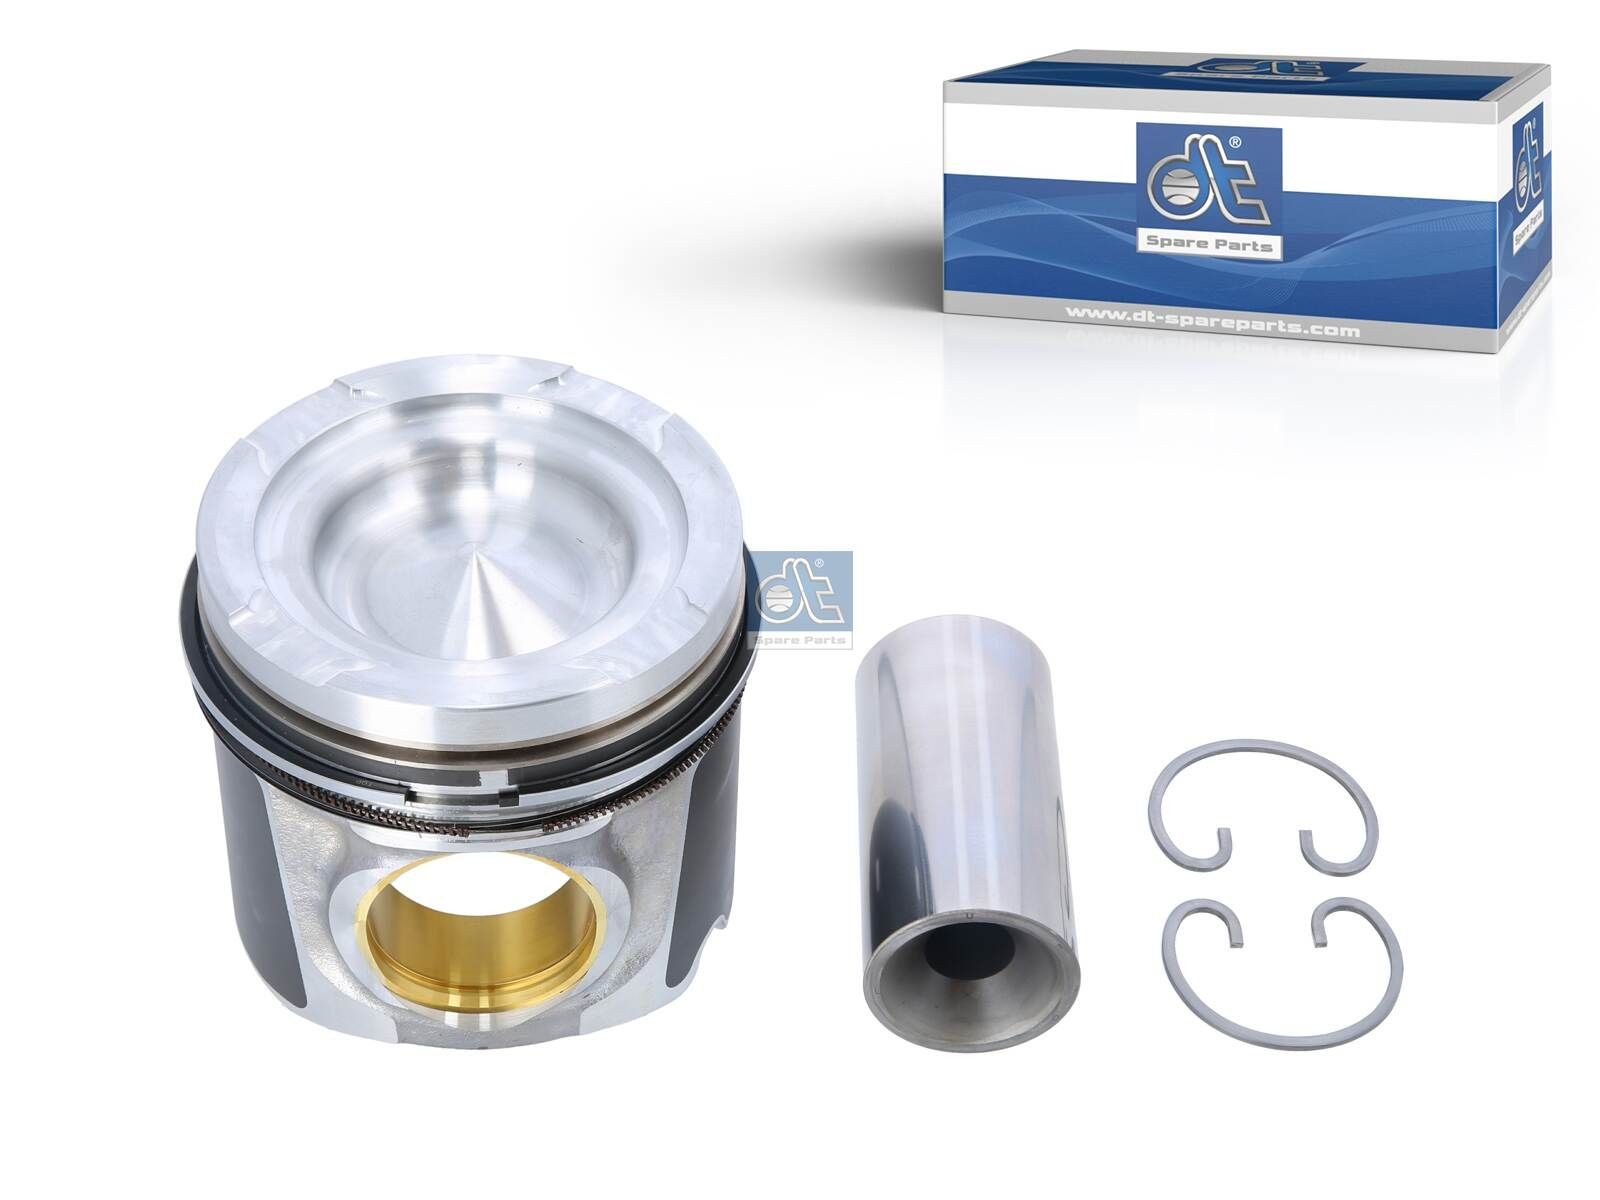 Original 3.10129 DT Spare Parts Piston experience and price